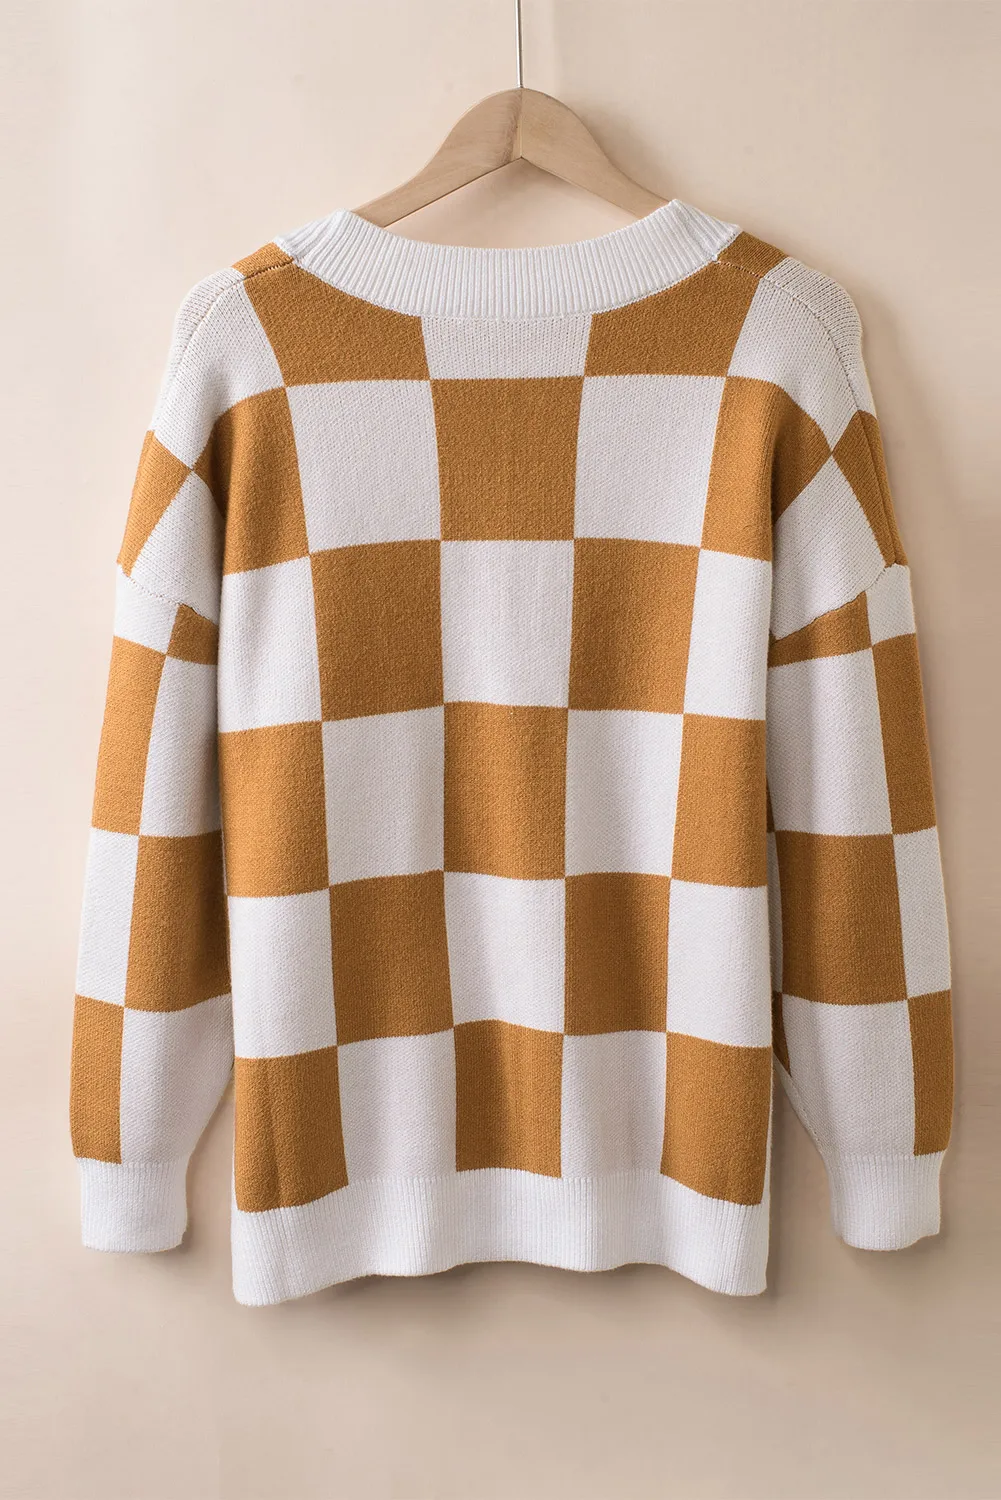 Dear-Lover Winter Brown Contrast Checkered Print Button Up Women Sweater Christmas Cardigan